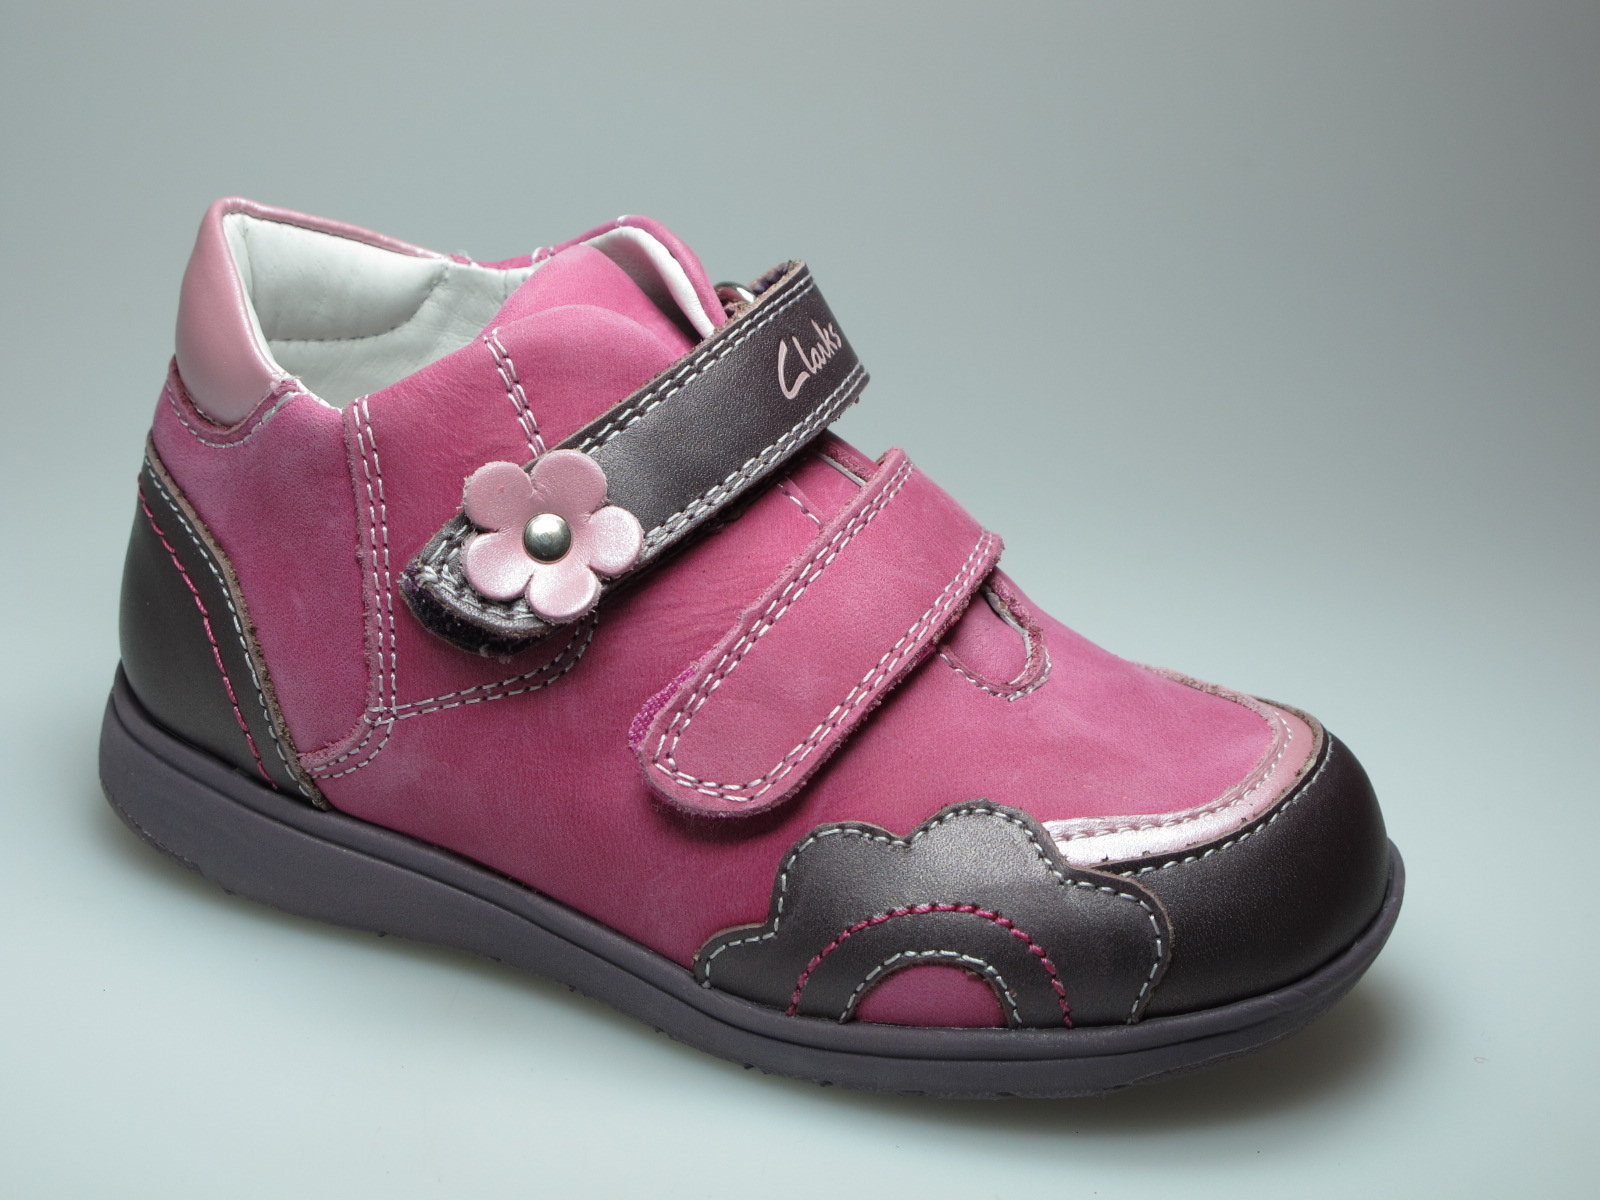 clarks kids shoes sale started in store today